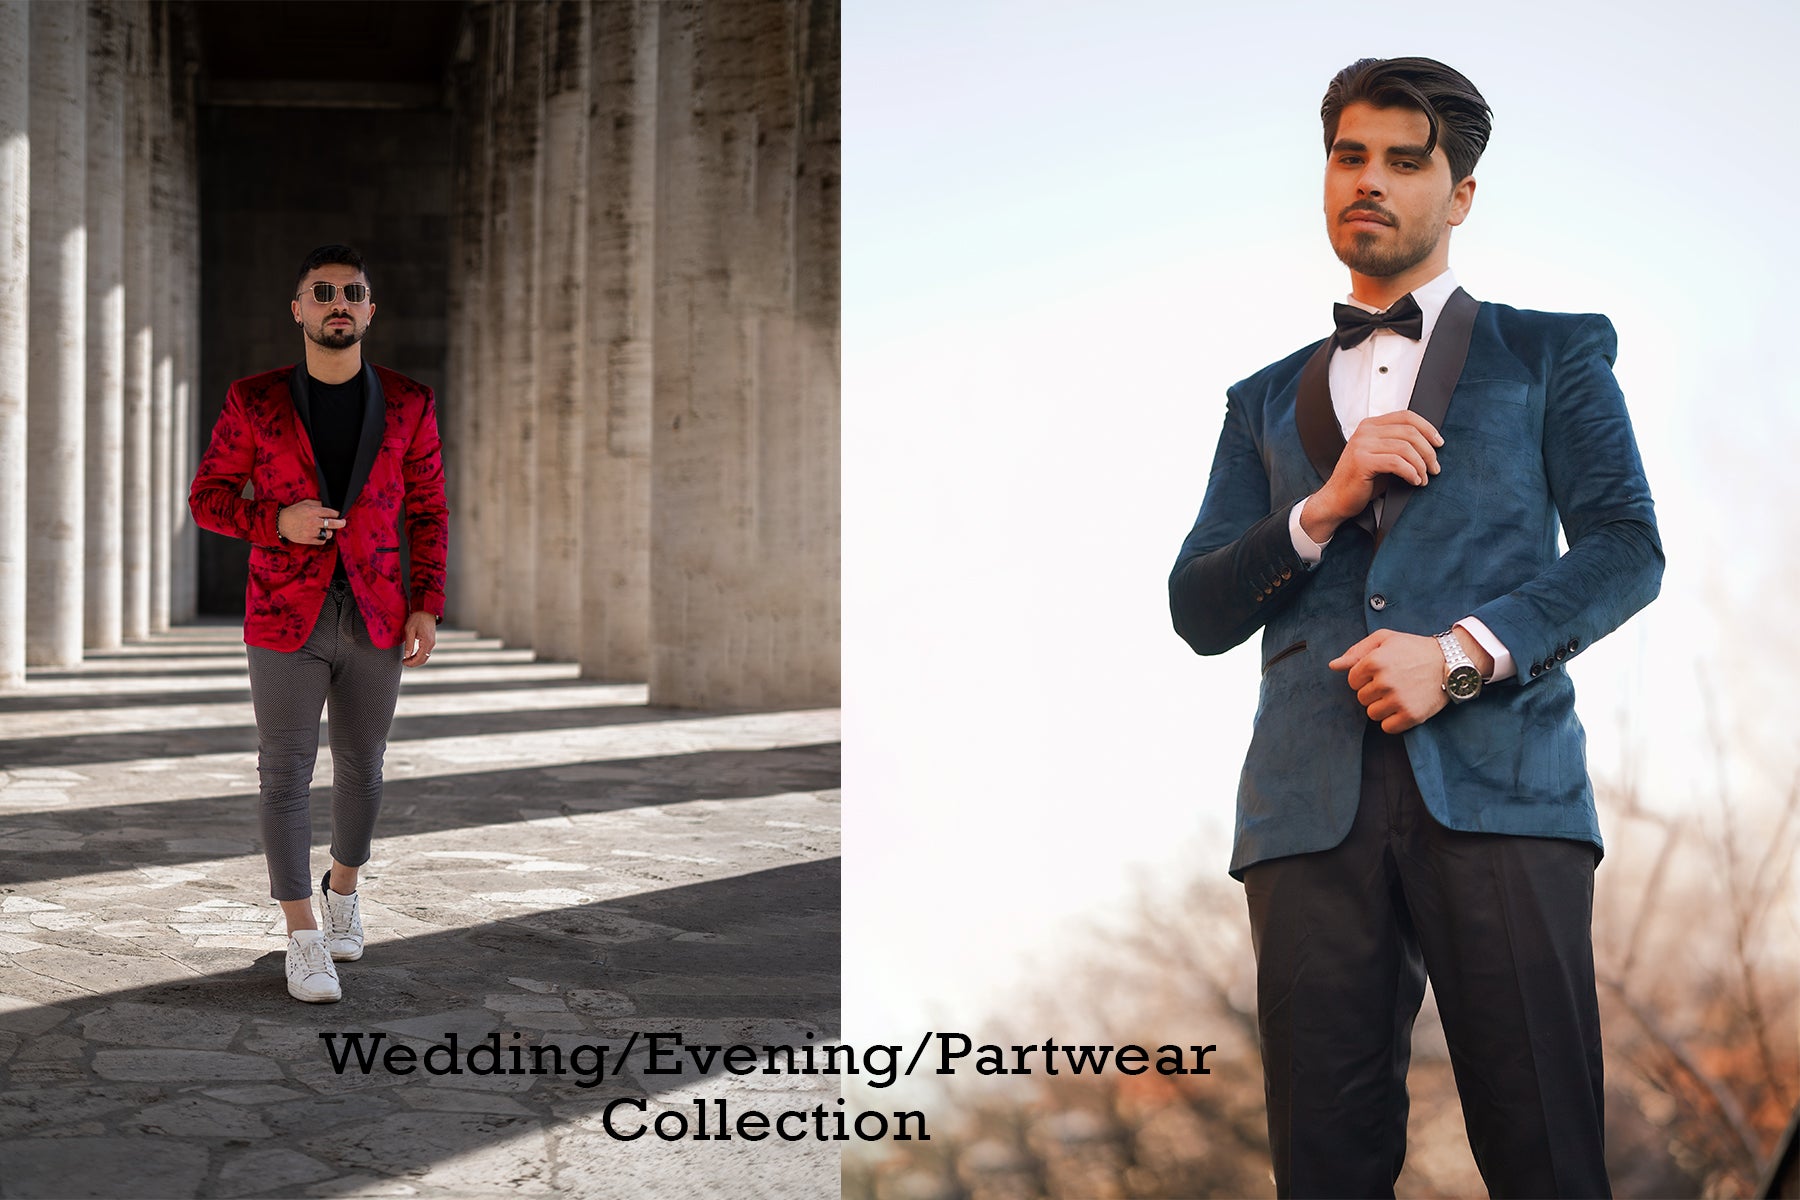 Wedding / Evening / Partywear Collection